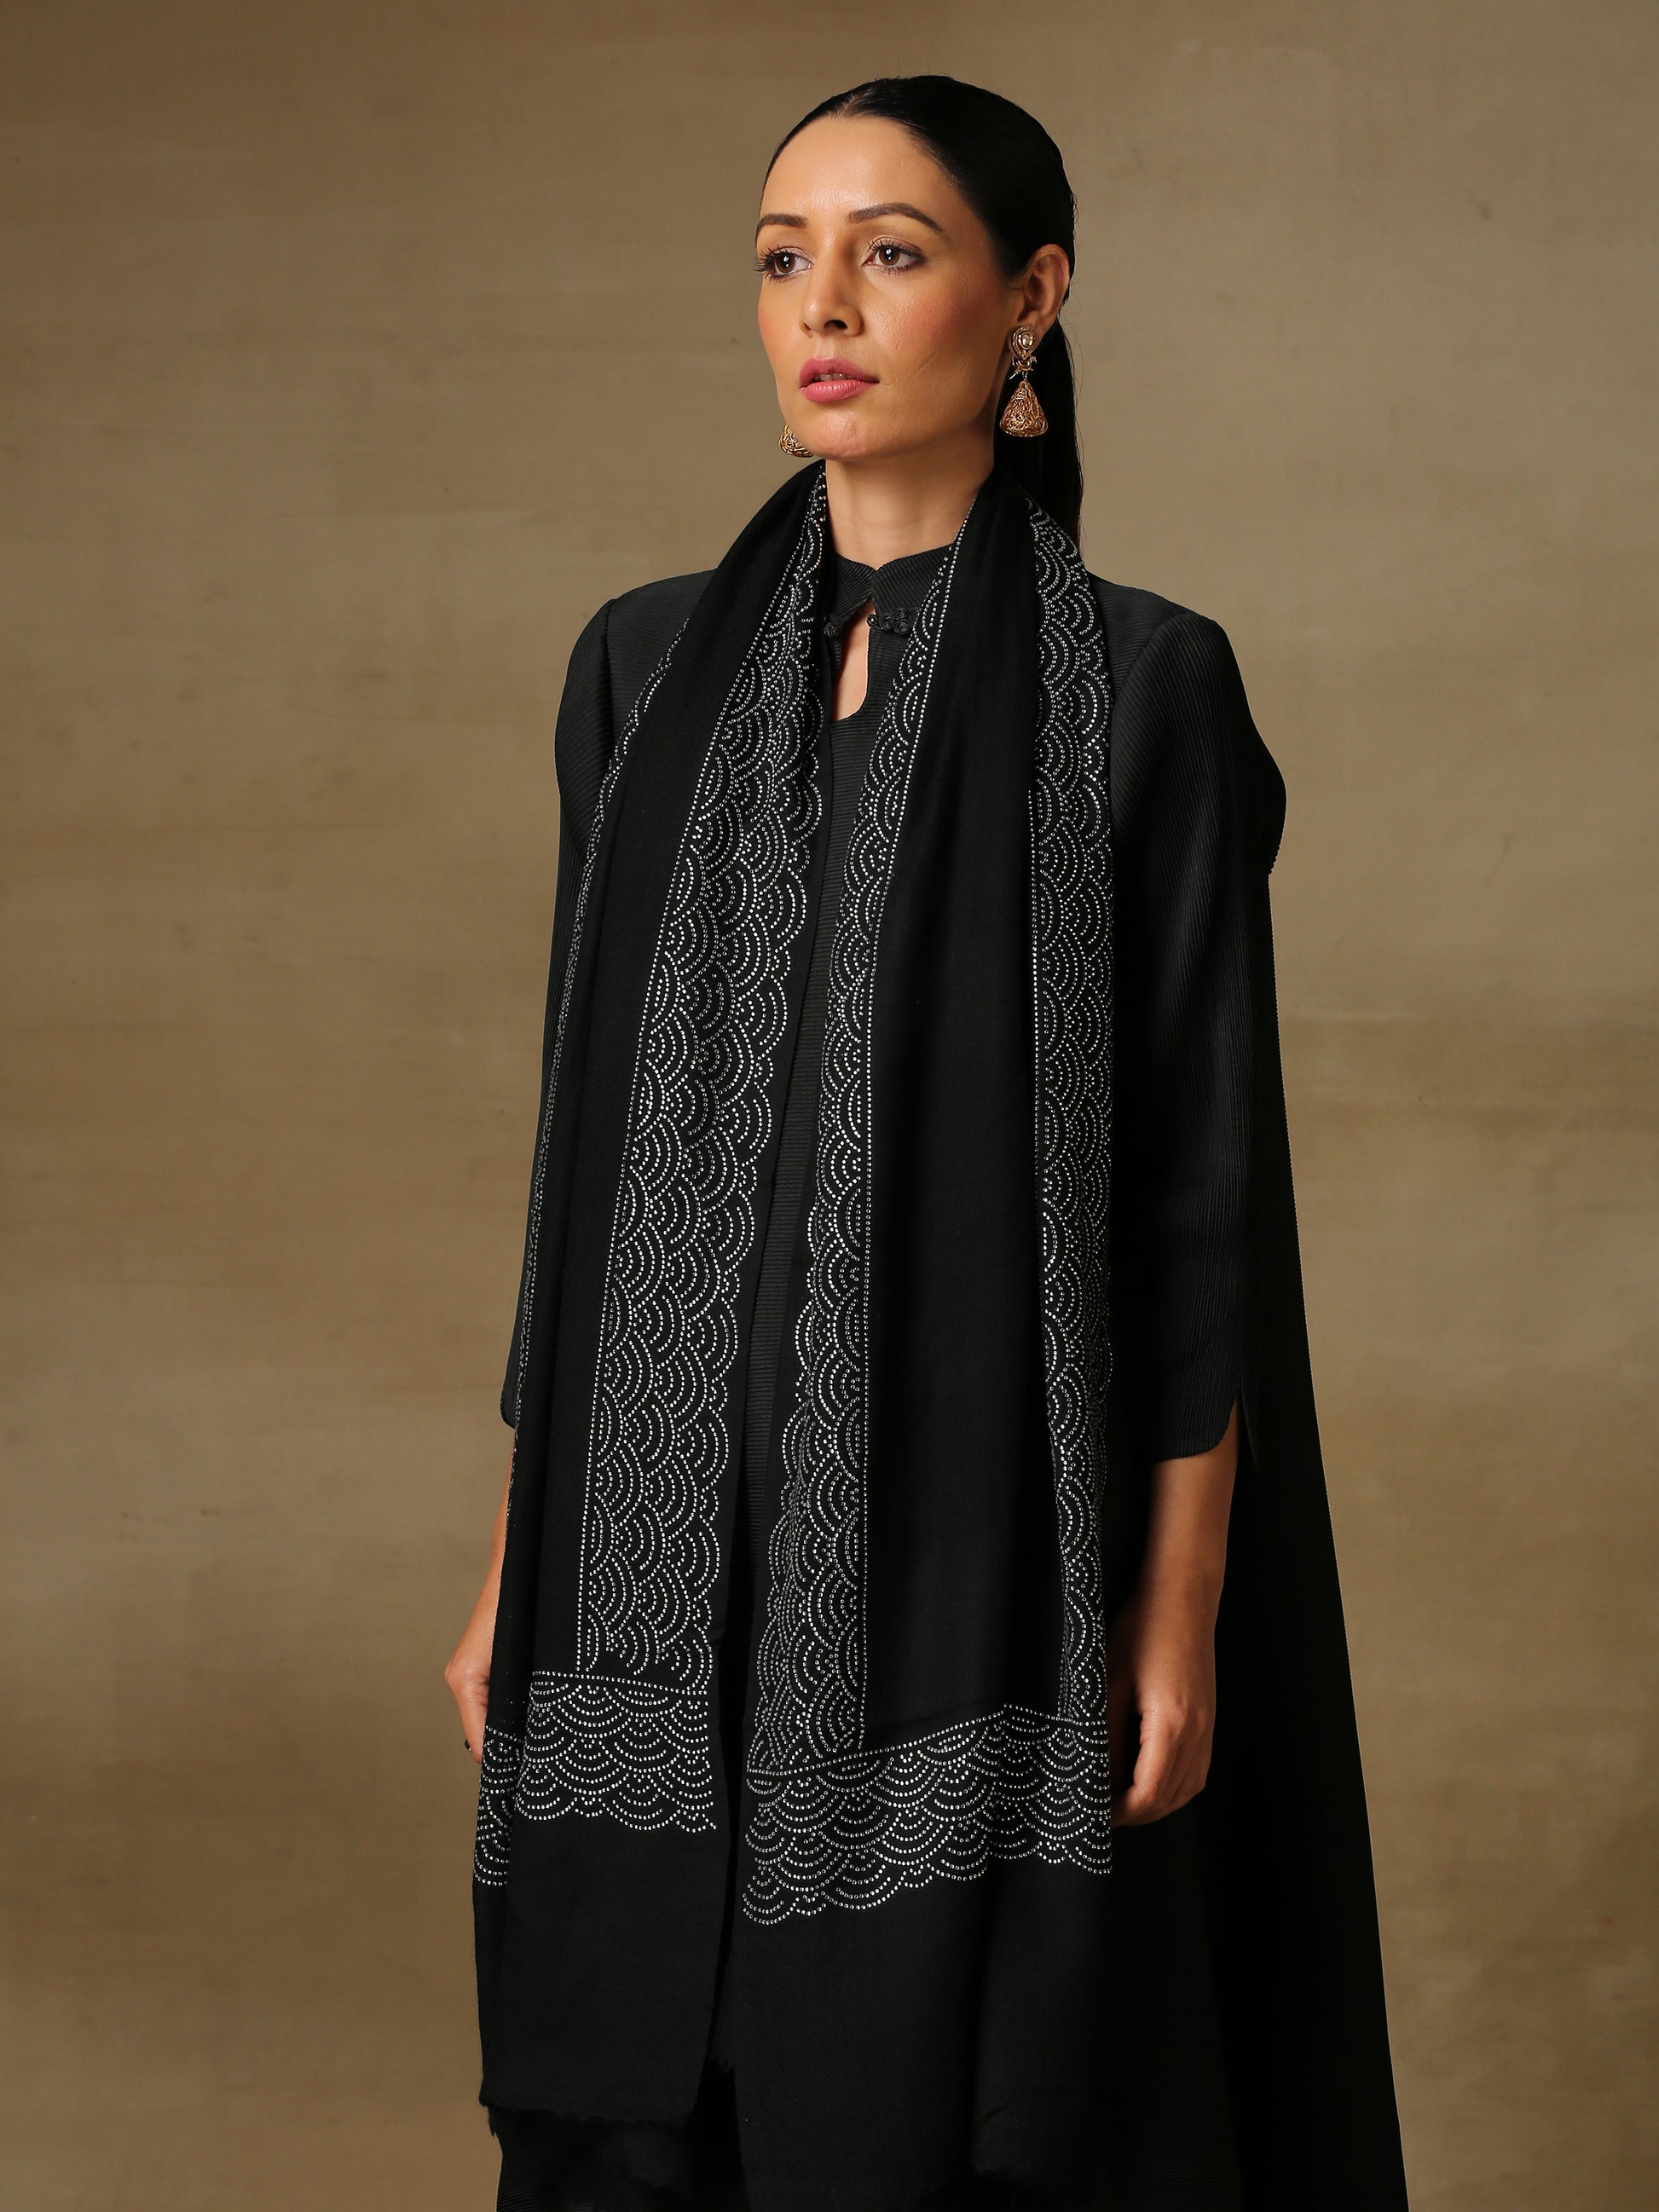 Model is wearing a black stole from the Era of Zaywar Border Swarovski Stole collection, hand embellished with silver swarovski in a clouds design.